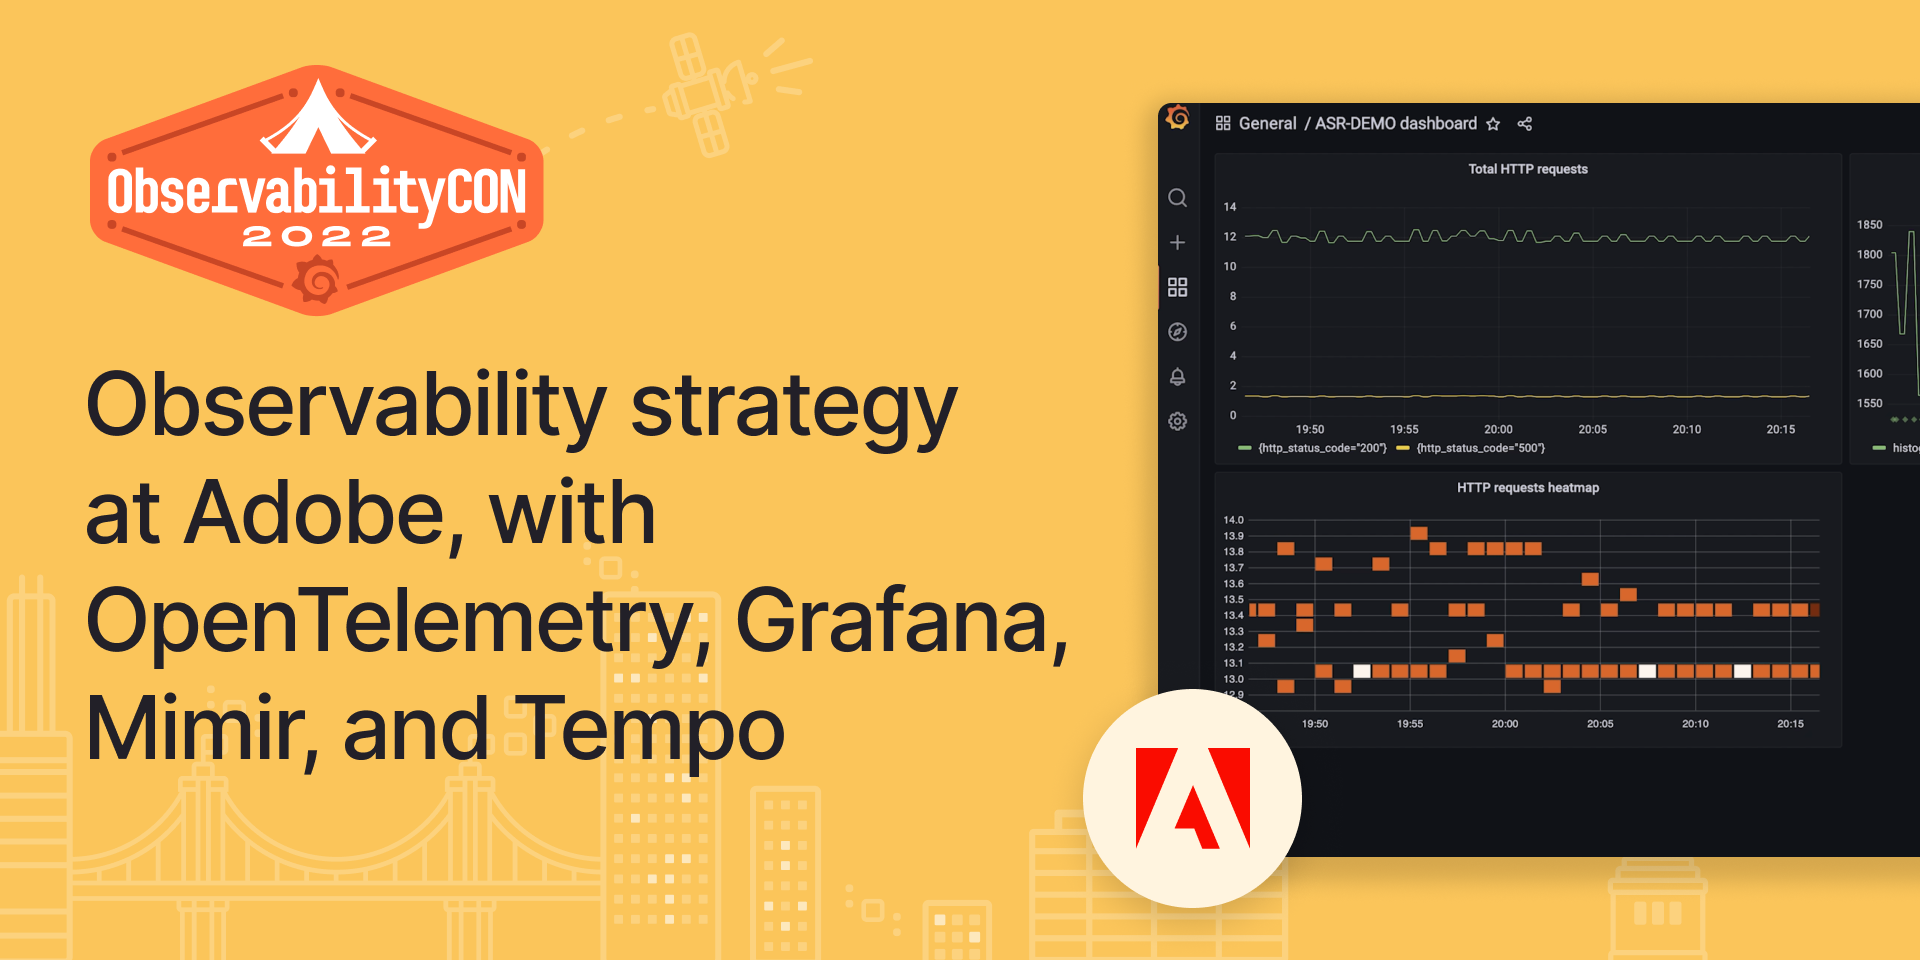 Observability strategy at Adobe, with OpenTelemetry, Grafana, Mimir, and Tempo